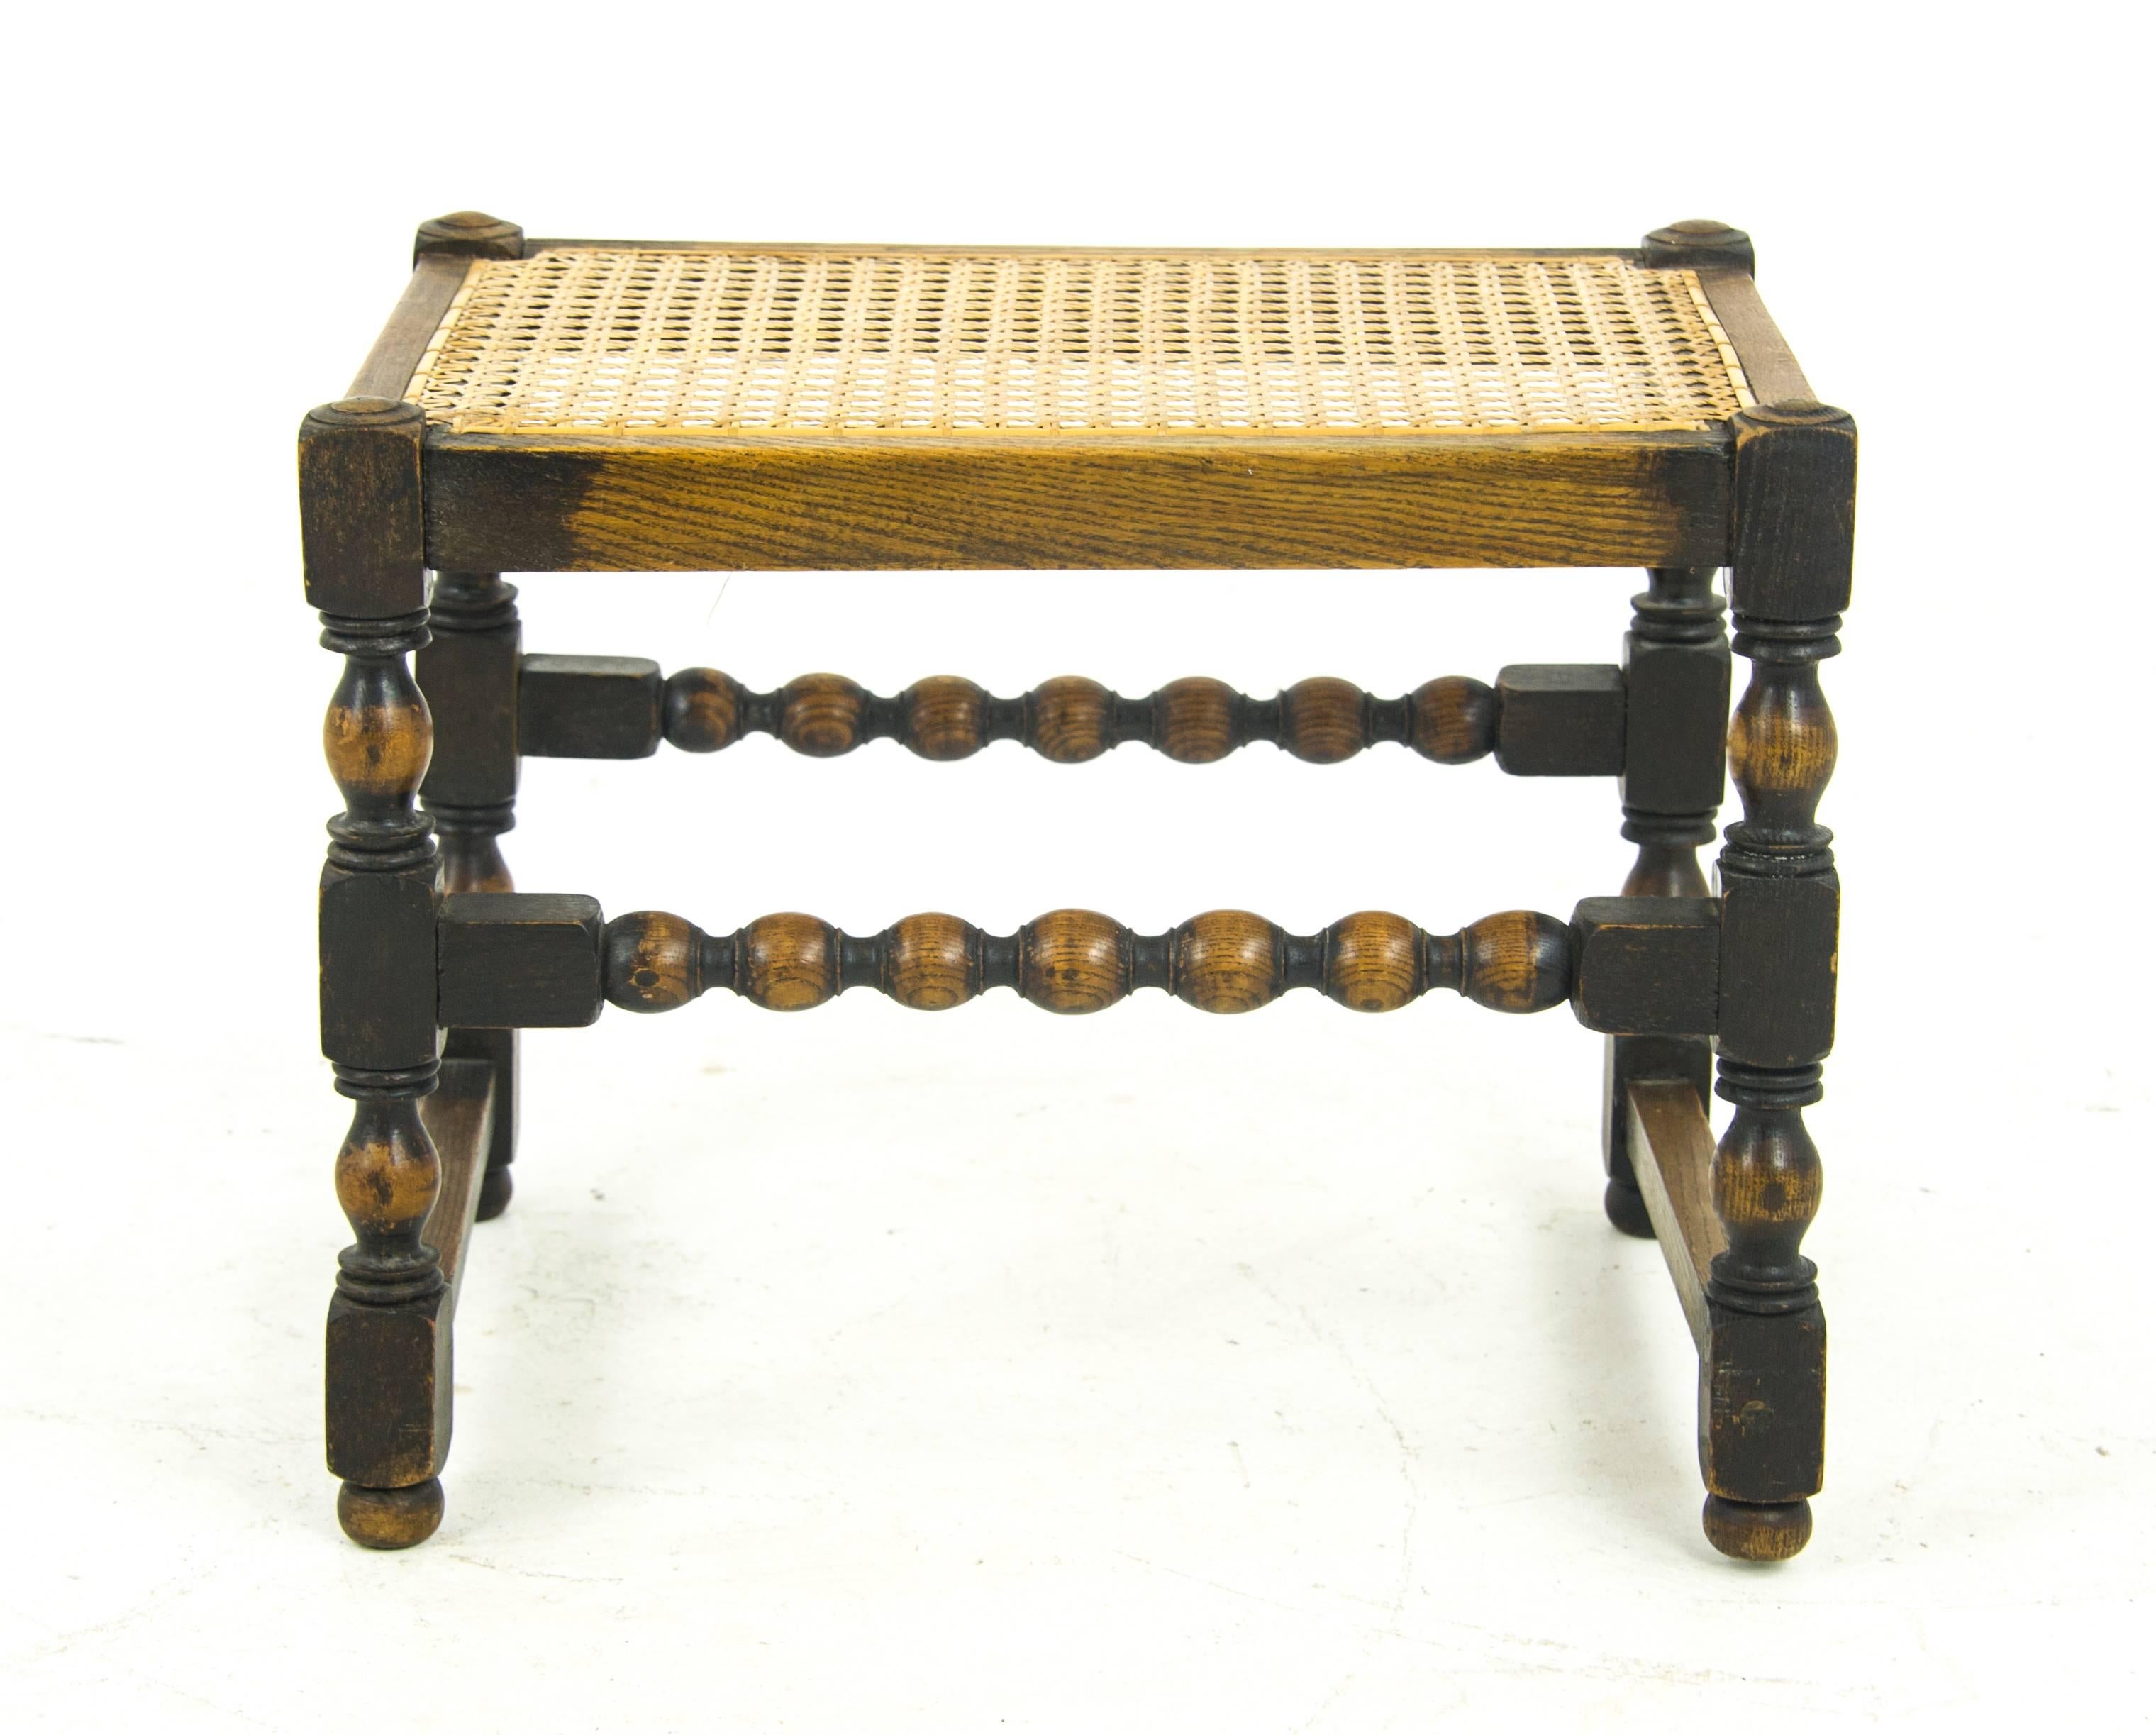 Antique dressing stool, caned top seat, beechwood bobbin foot, antique furniture, scotland, 1900, B986

Scotland 1900
Solid beechwood with original finish
Caned seat on top
Raised on turned legs
Connected by bobbin cross stretchers
Lovely color and